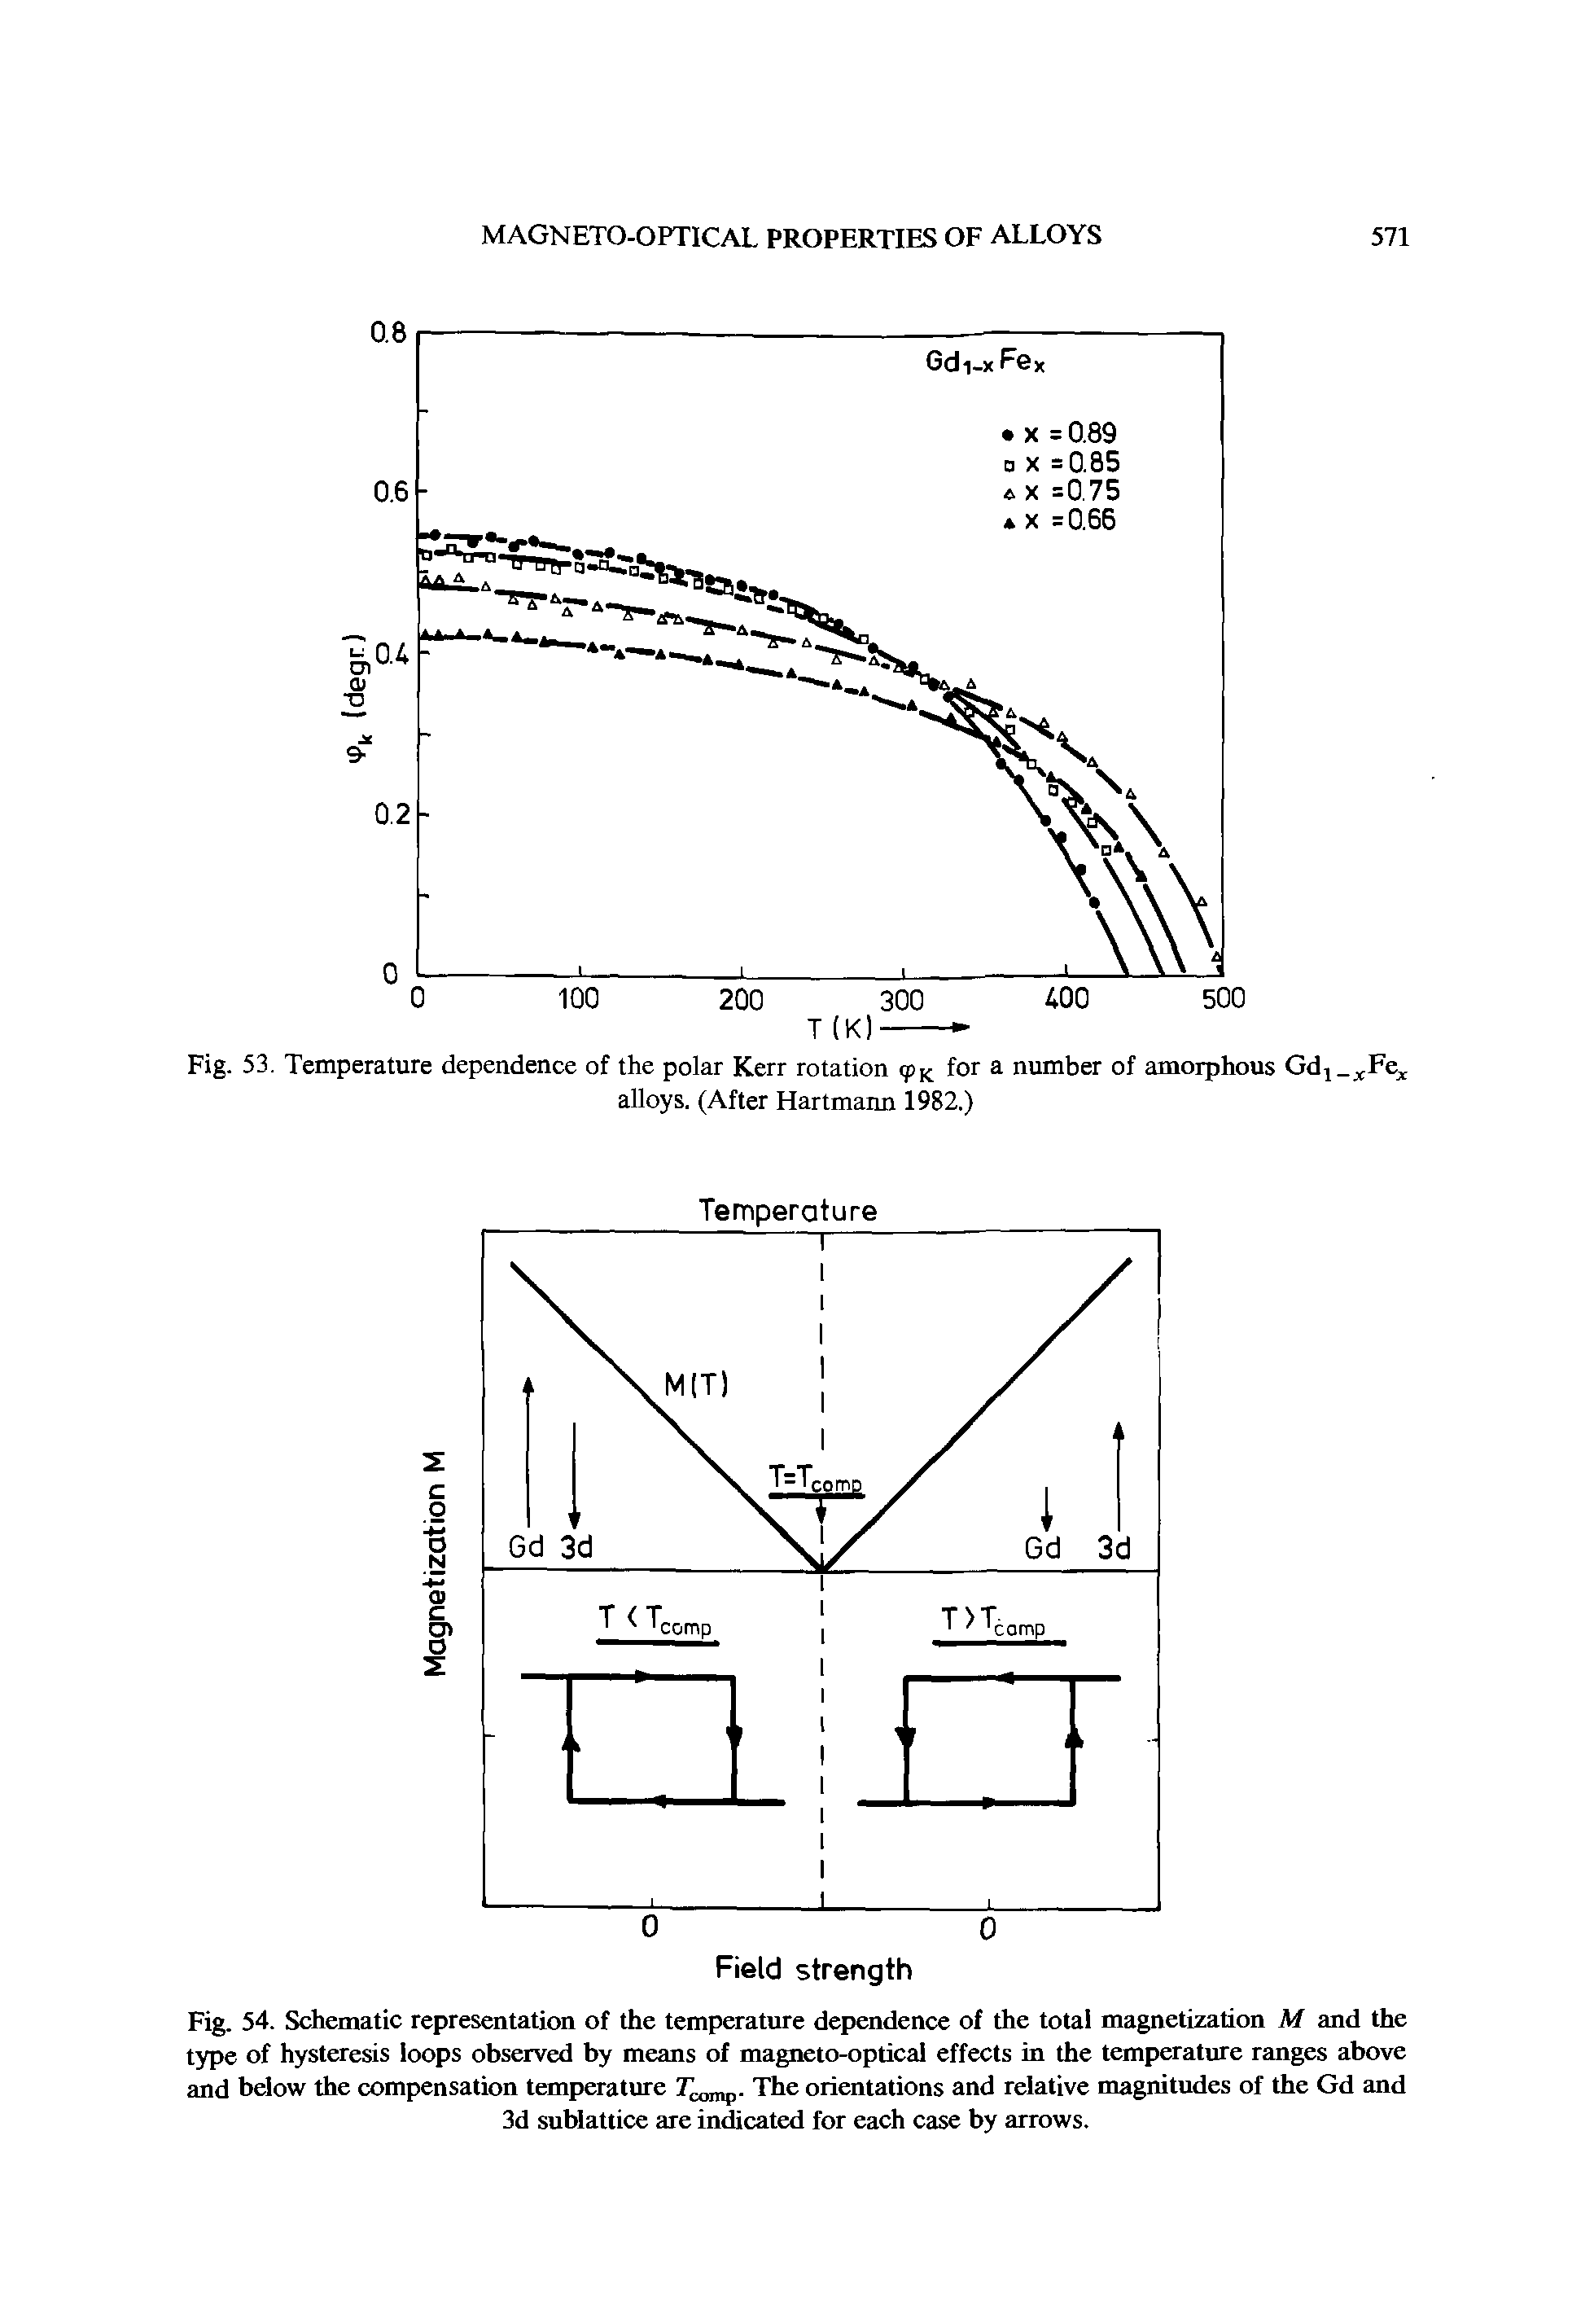 Fig. 54. Schematic representation of the temperature dependence of the total magnetization M and the type of hysteresis loops observed by means of magneto-optical effects in the temperature ranges above and below the compensation temperature Tcamp. The orientations and relative magnitudes of the Gd and 3d sublattice are indicated for each case by arrows.